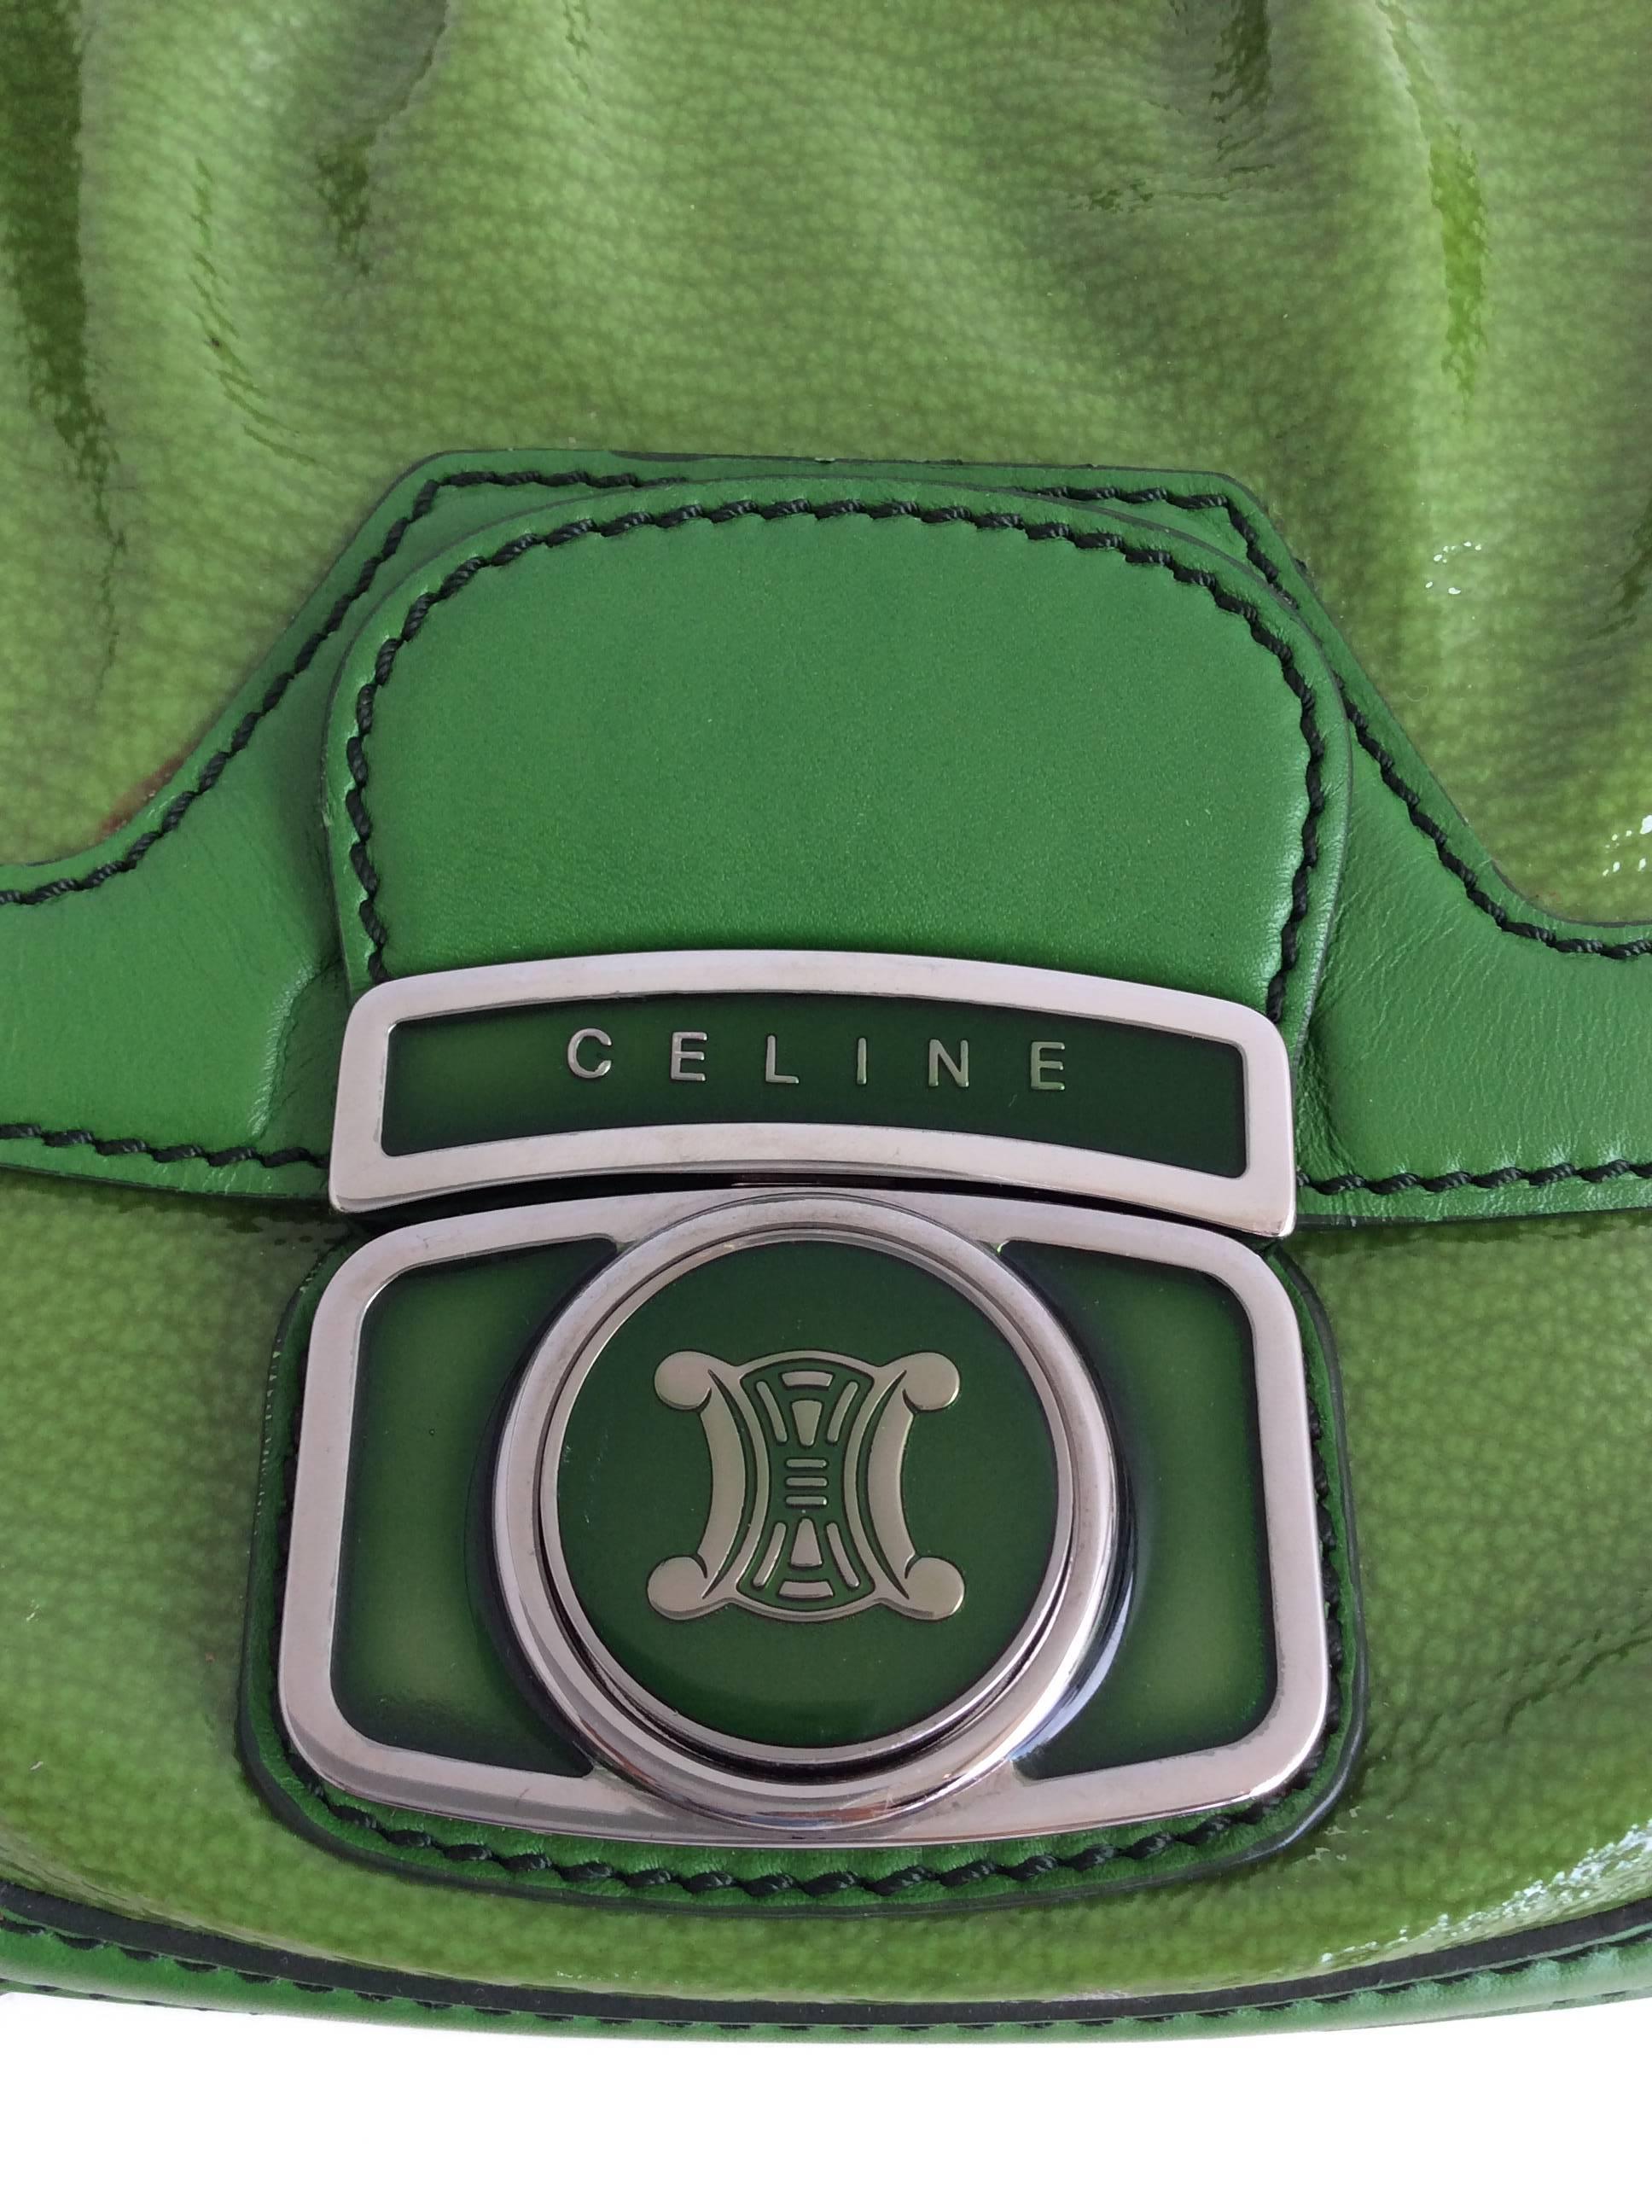 Celine Green Patent Leather Satchel with Shoulder Strap with Silver Hardware For Sale 2